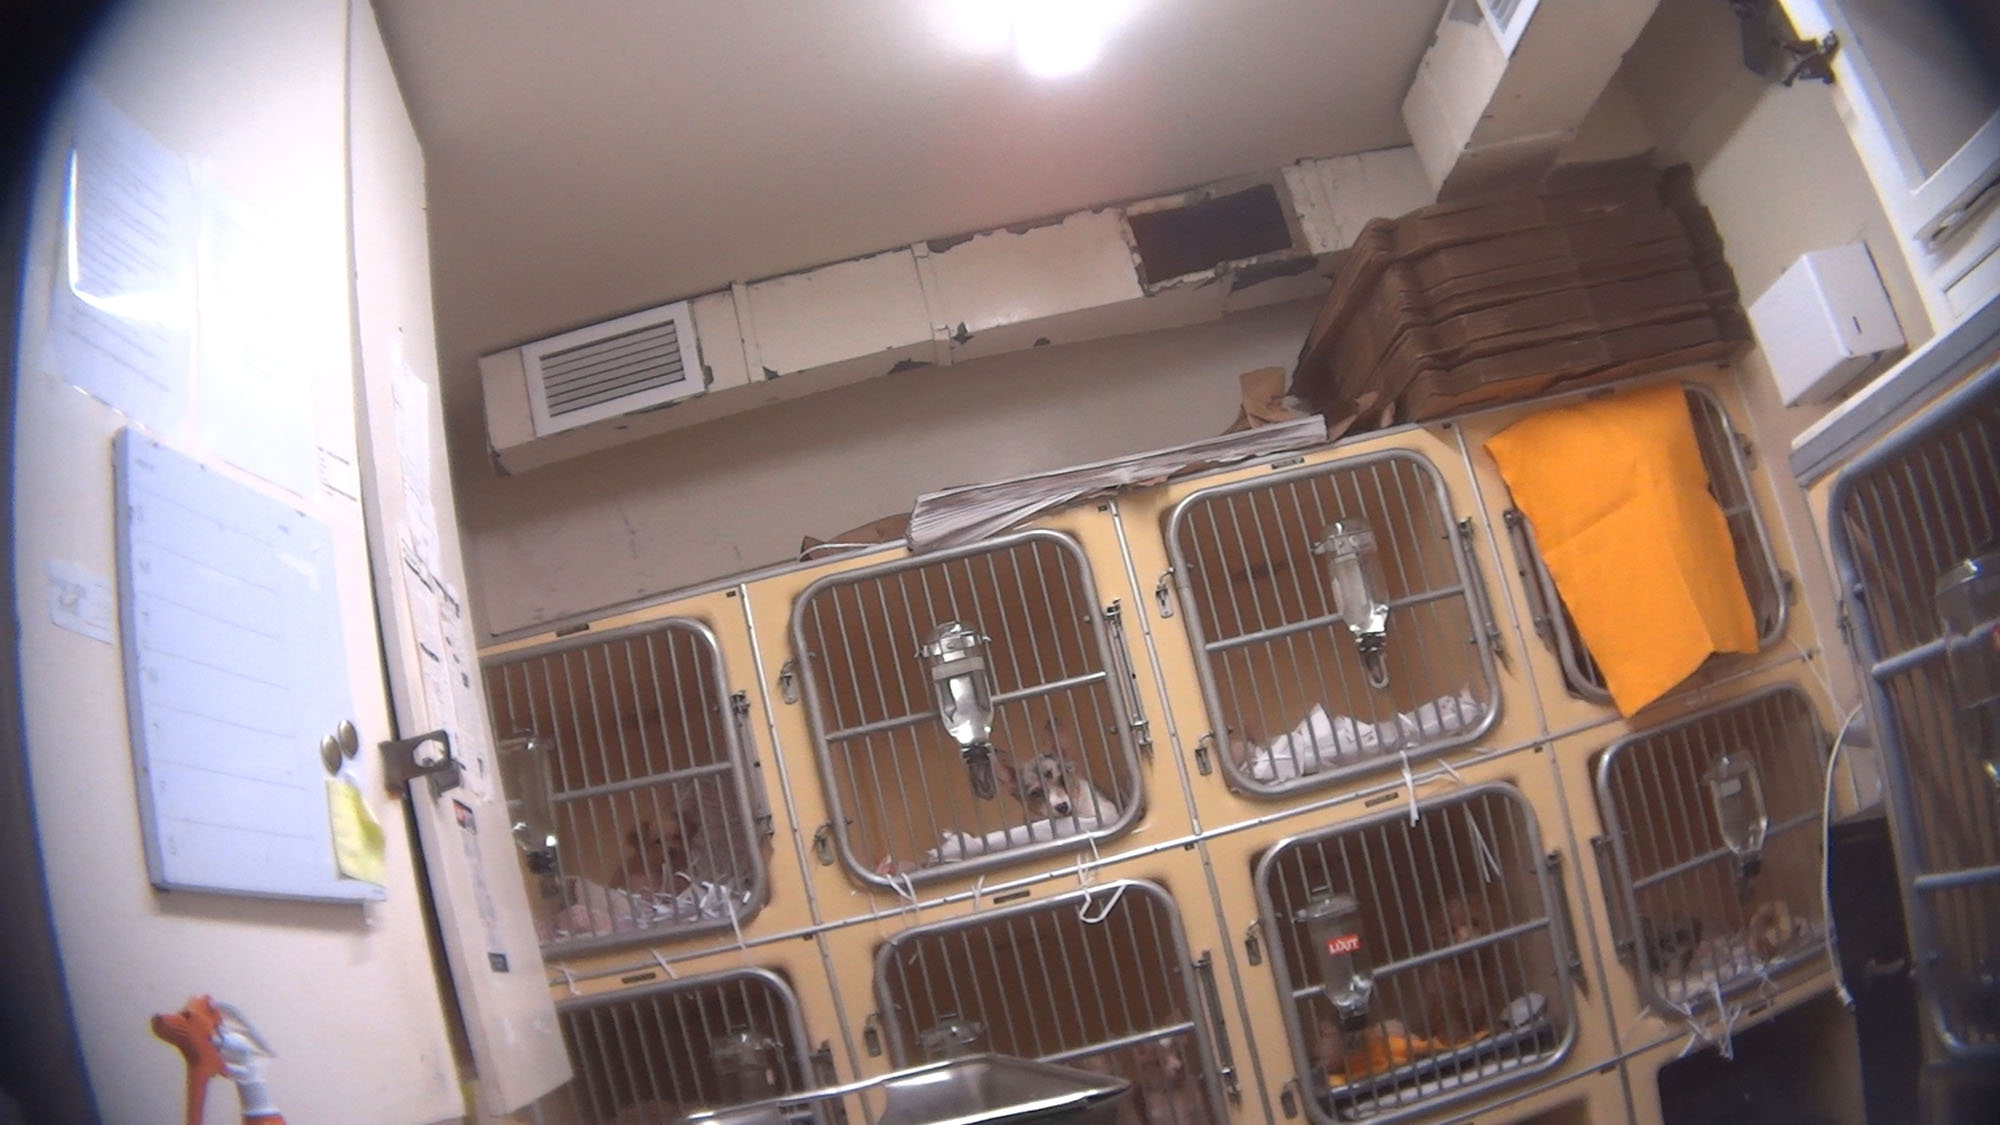 Humane Society footage shows the pitiful conditions.